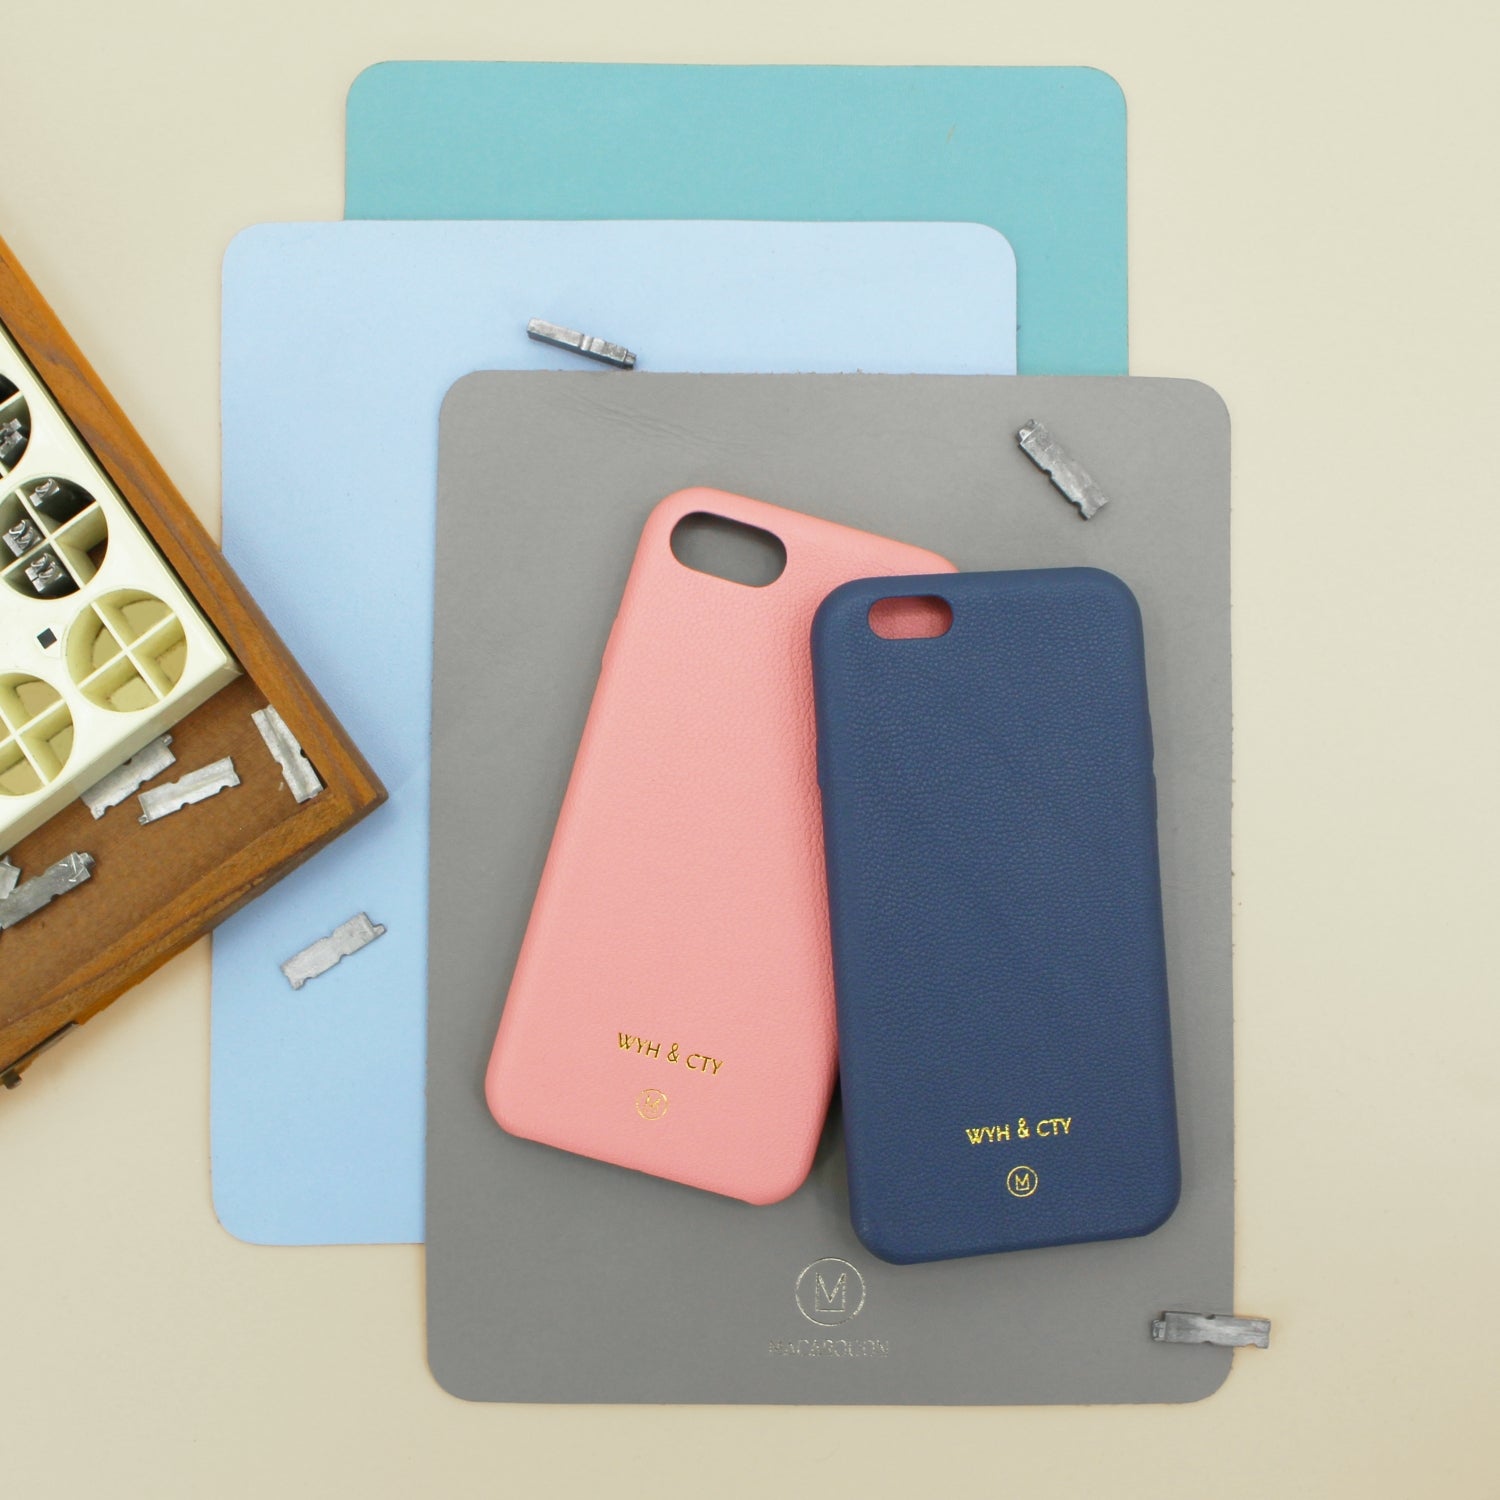 Have a special name or date embossed on your iPhone Cases at Macarooon.